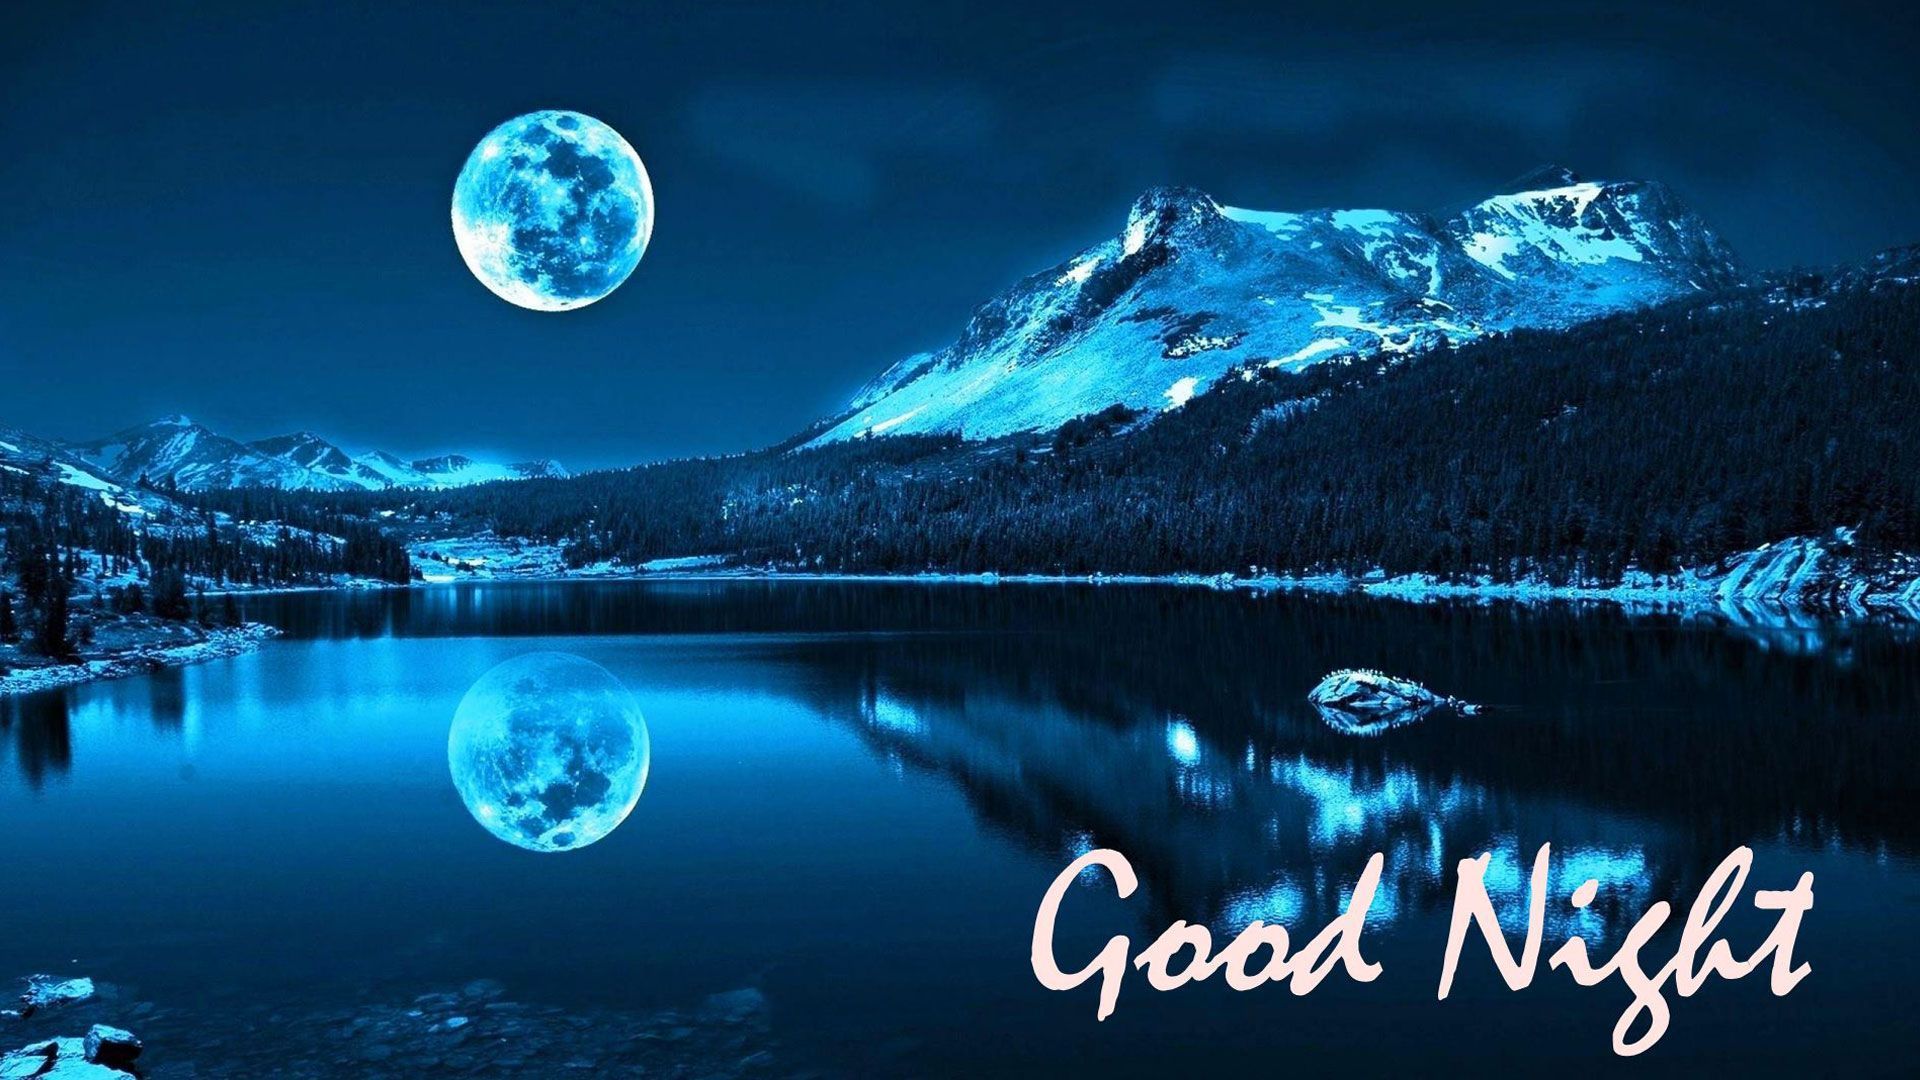 Good Night Wallpaper High Resolution Download8 - Mountains And Blue Moon , HD Wallpaper & Backgrounds